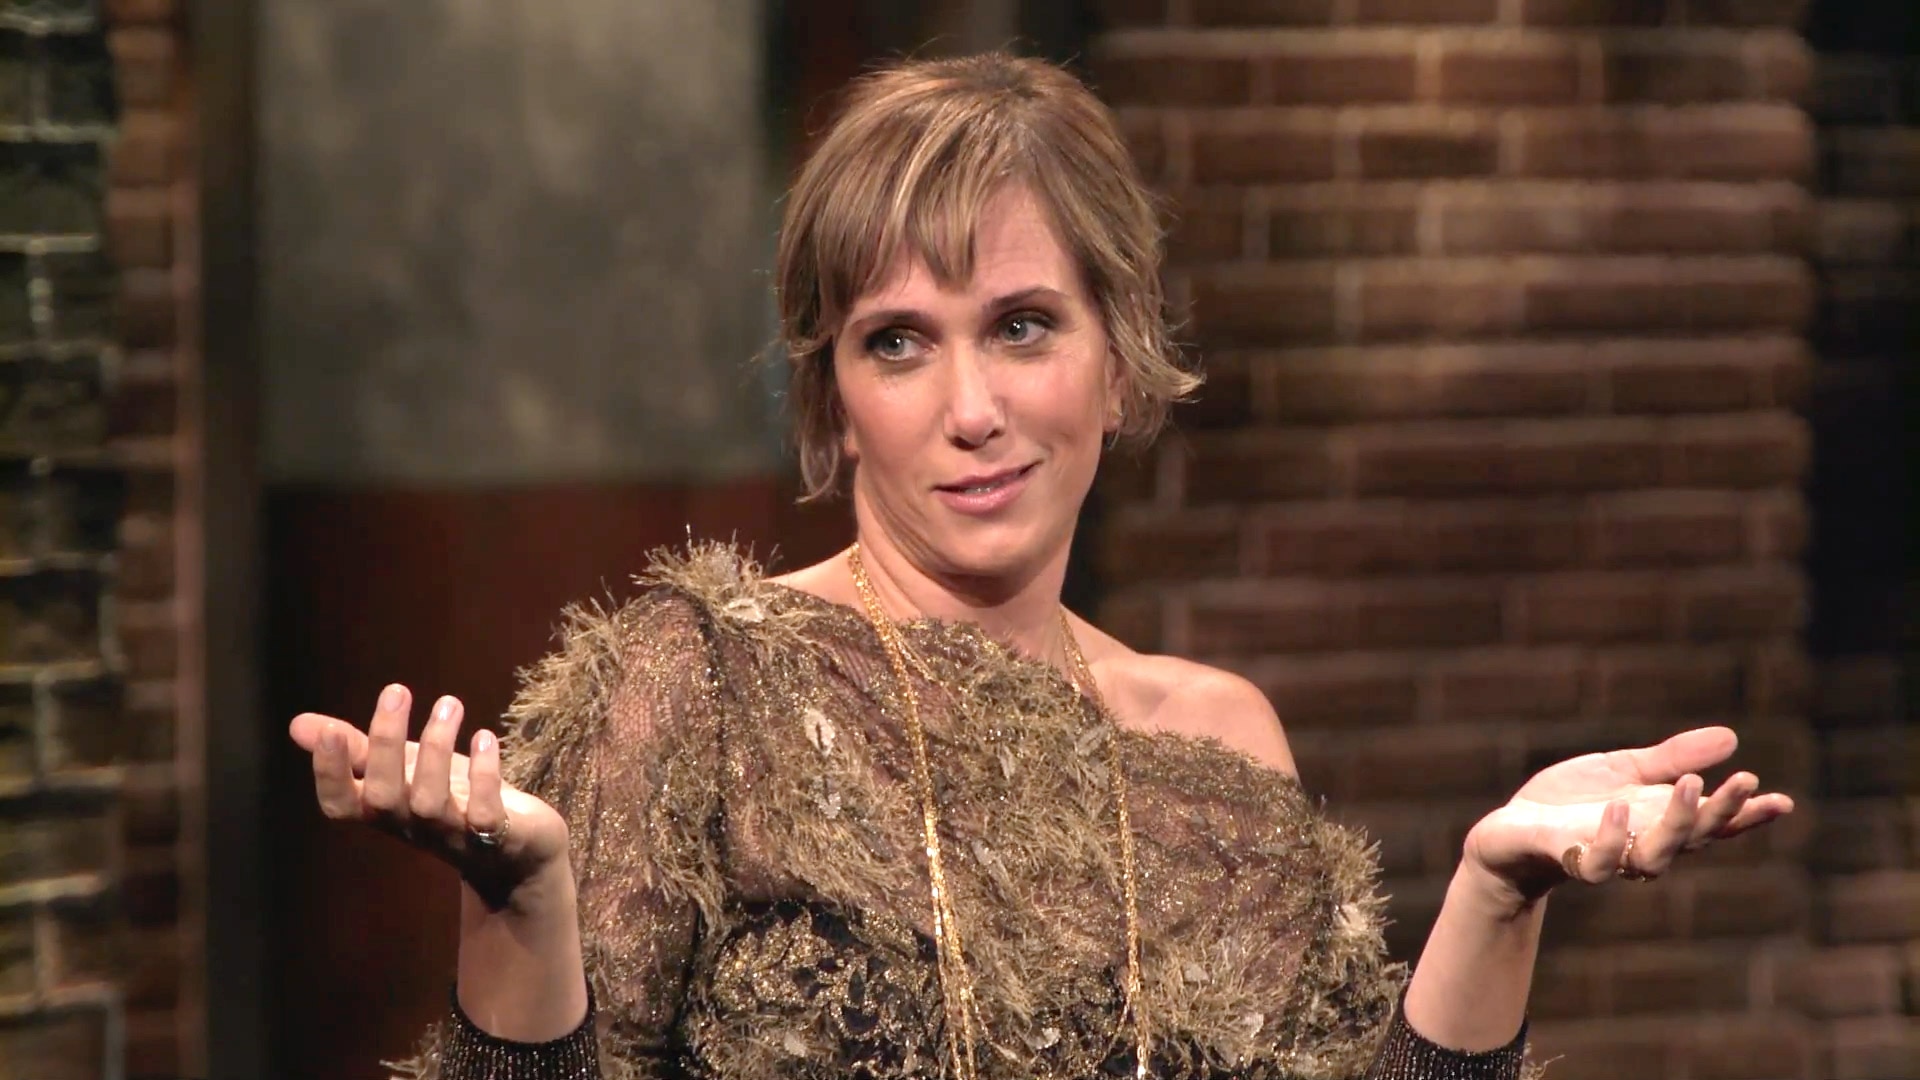 How a Psychic Helped Convince Kristen Wiig to Move to LA